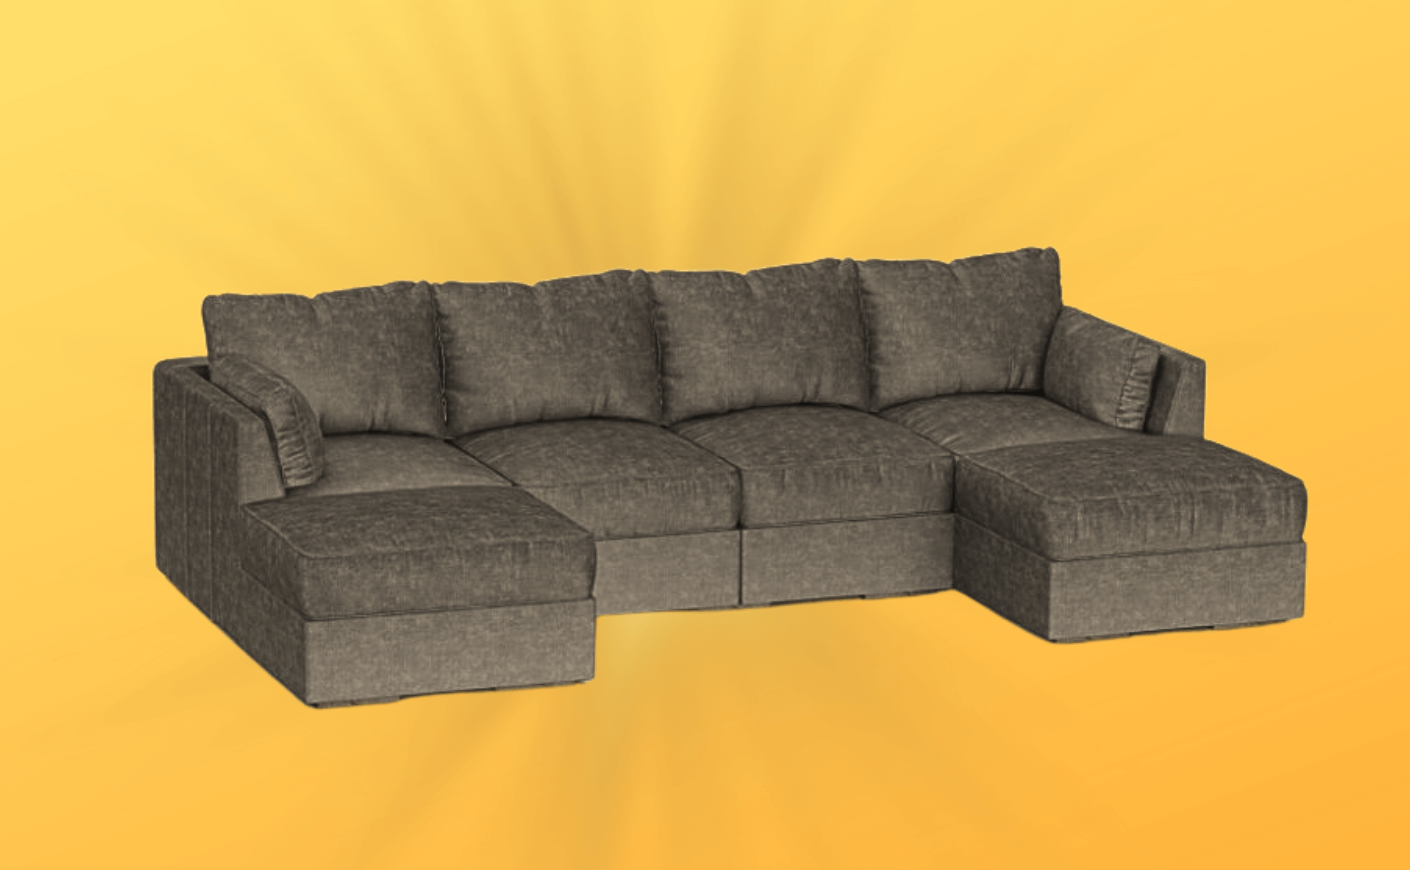 Kozy Couch - Have you ordered your Kozy Couch yet? Pre-orders are